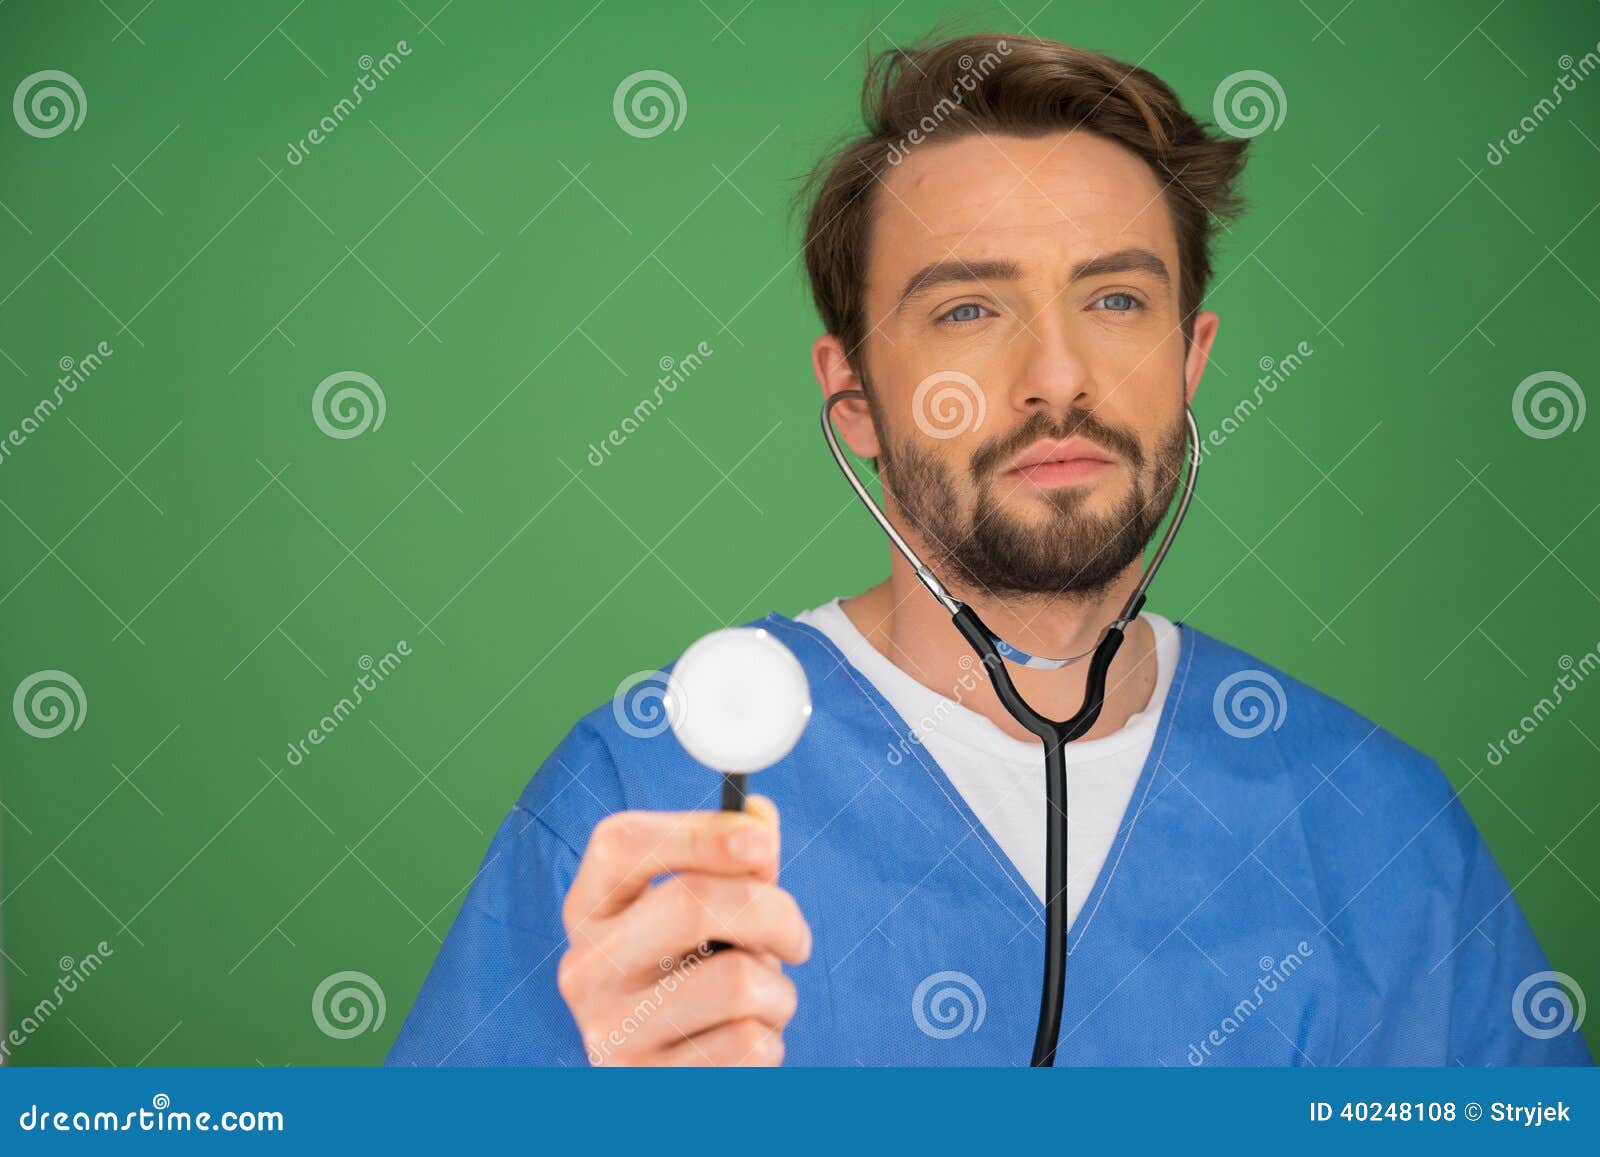 anaesthetist or doctor holding a stethoscope